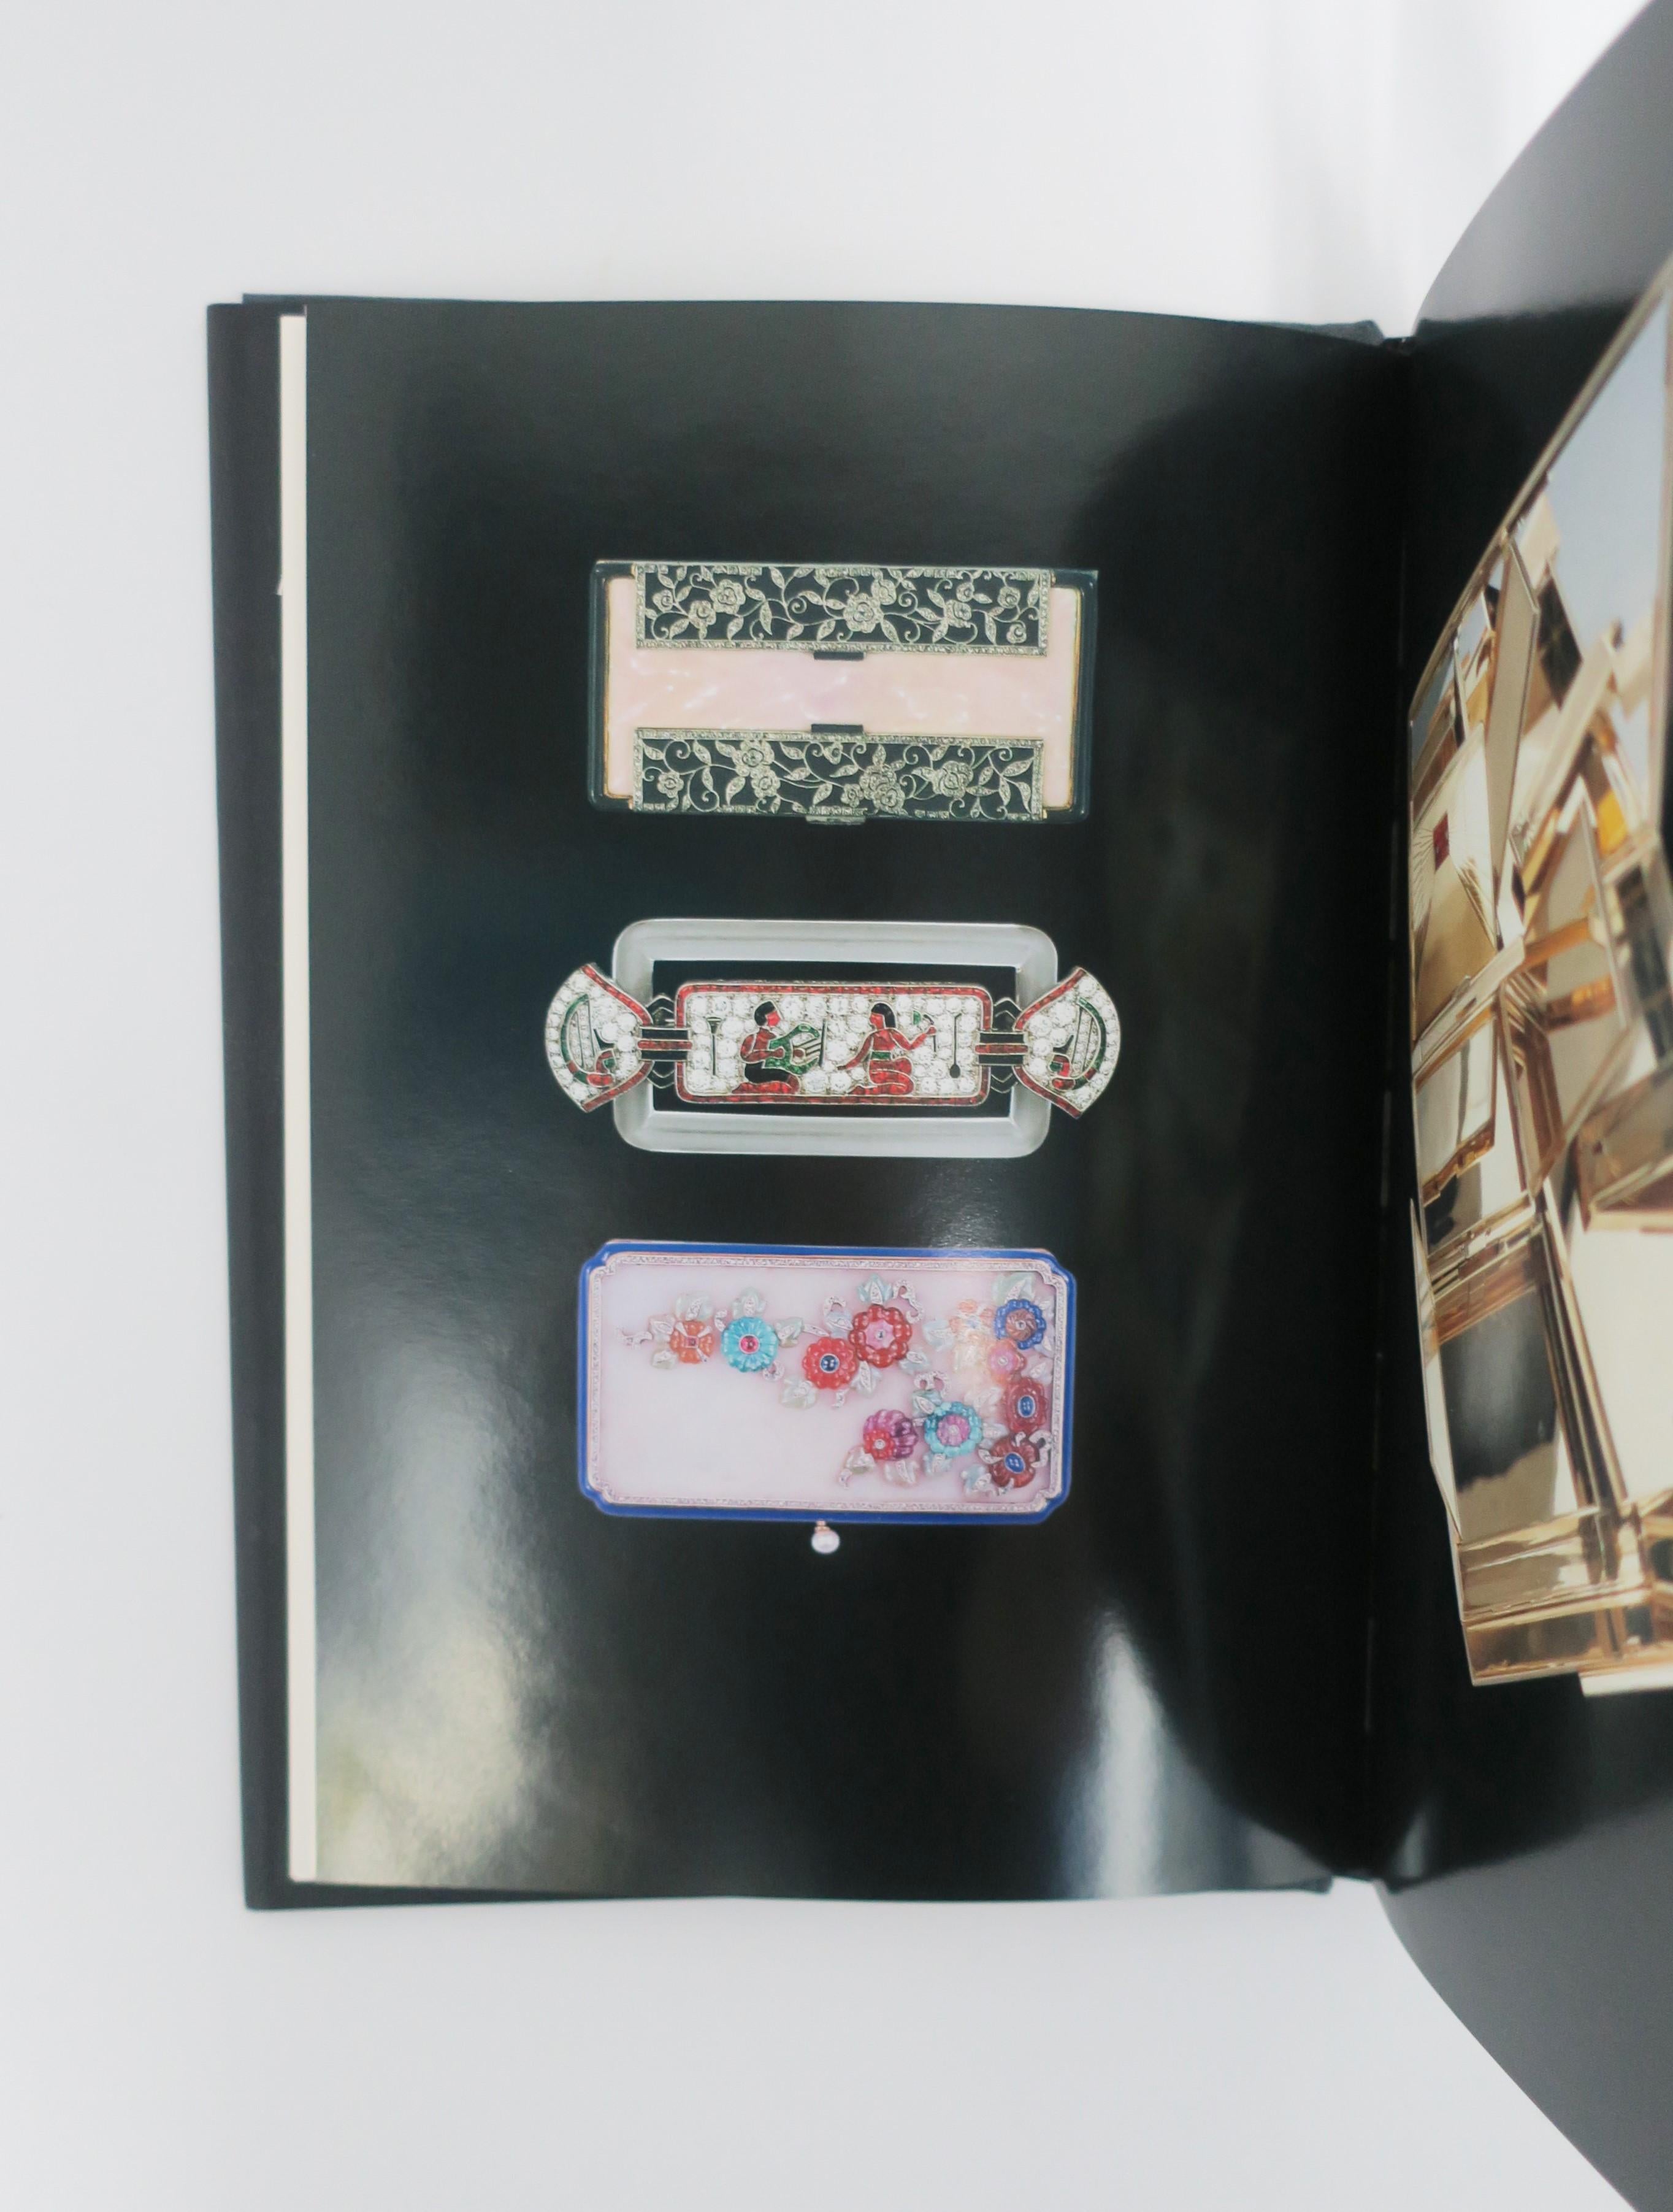 Paper Van Cleef & Arpels Library or Coffee Table Book, circa 1990s